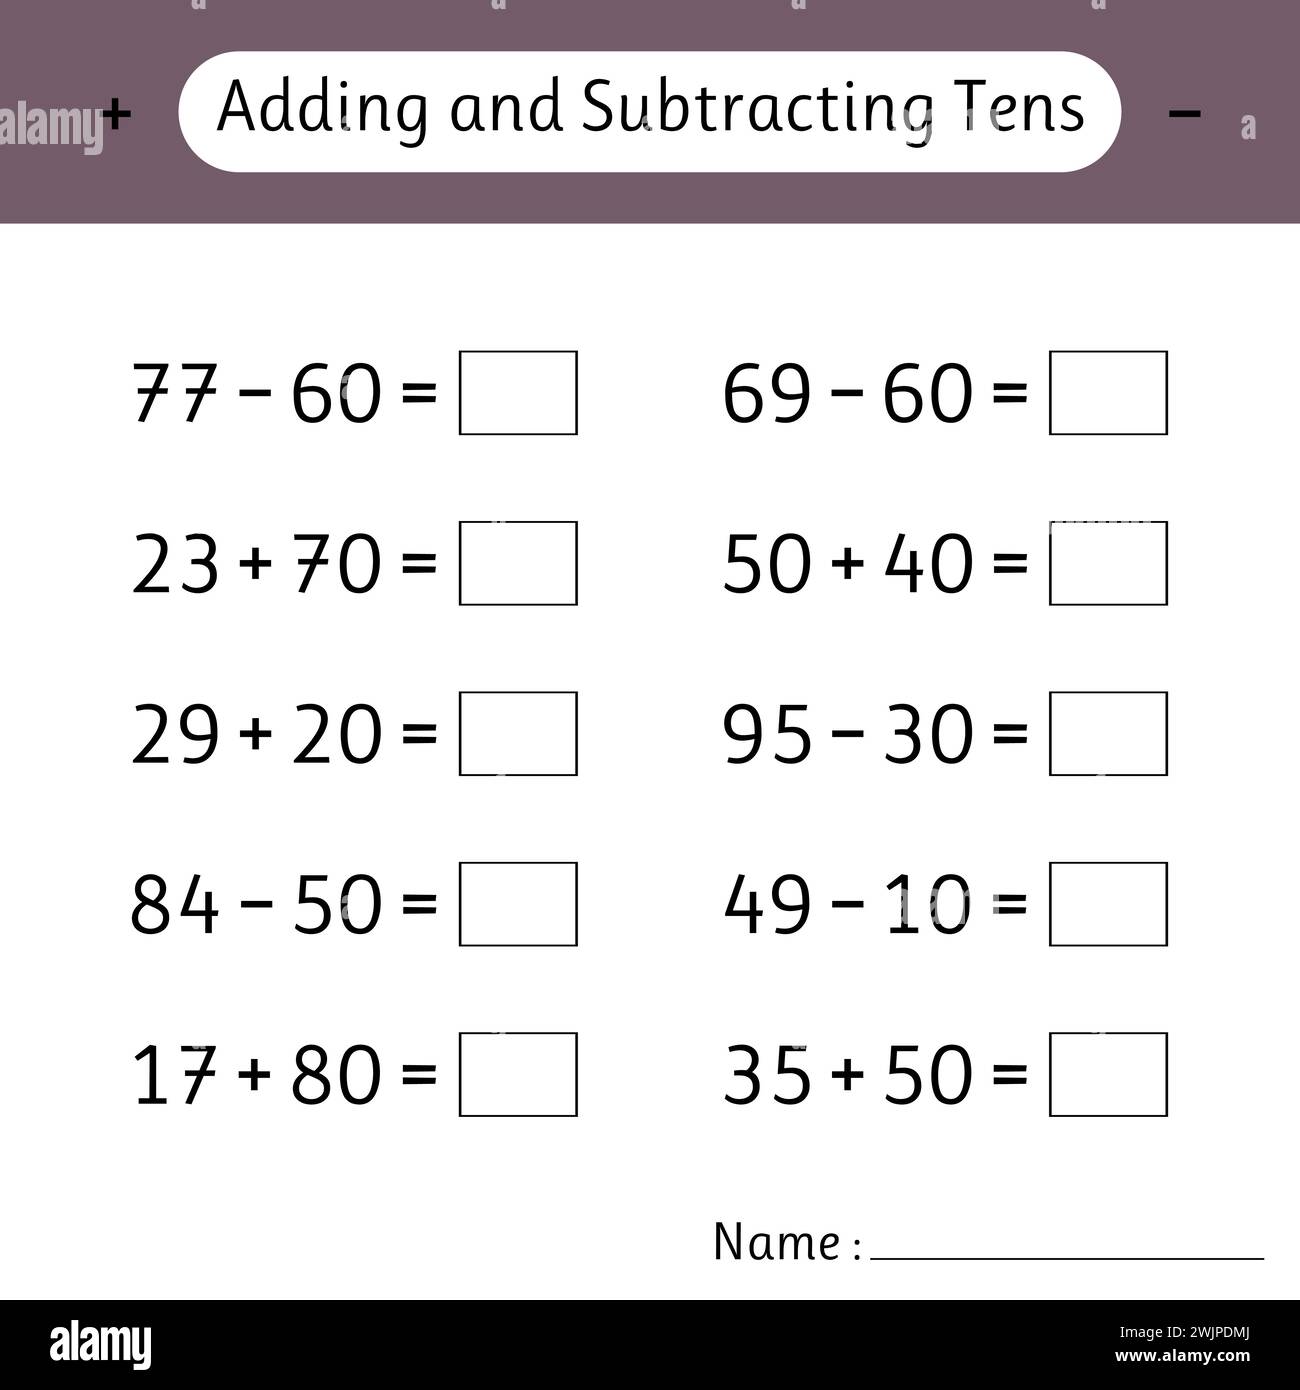 Adding and Subtracting Tens. Mathematics. Math worksheets for kids. School education. Development of logical thinking. Vector illustration Stock Vector